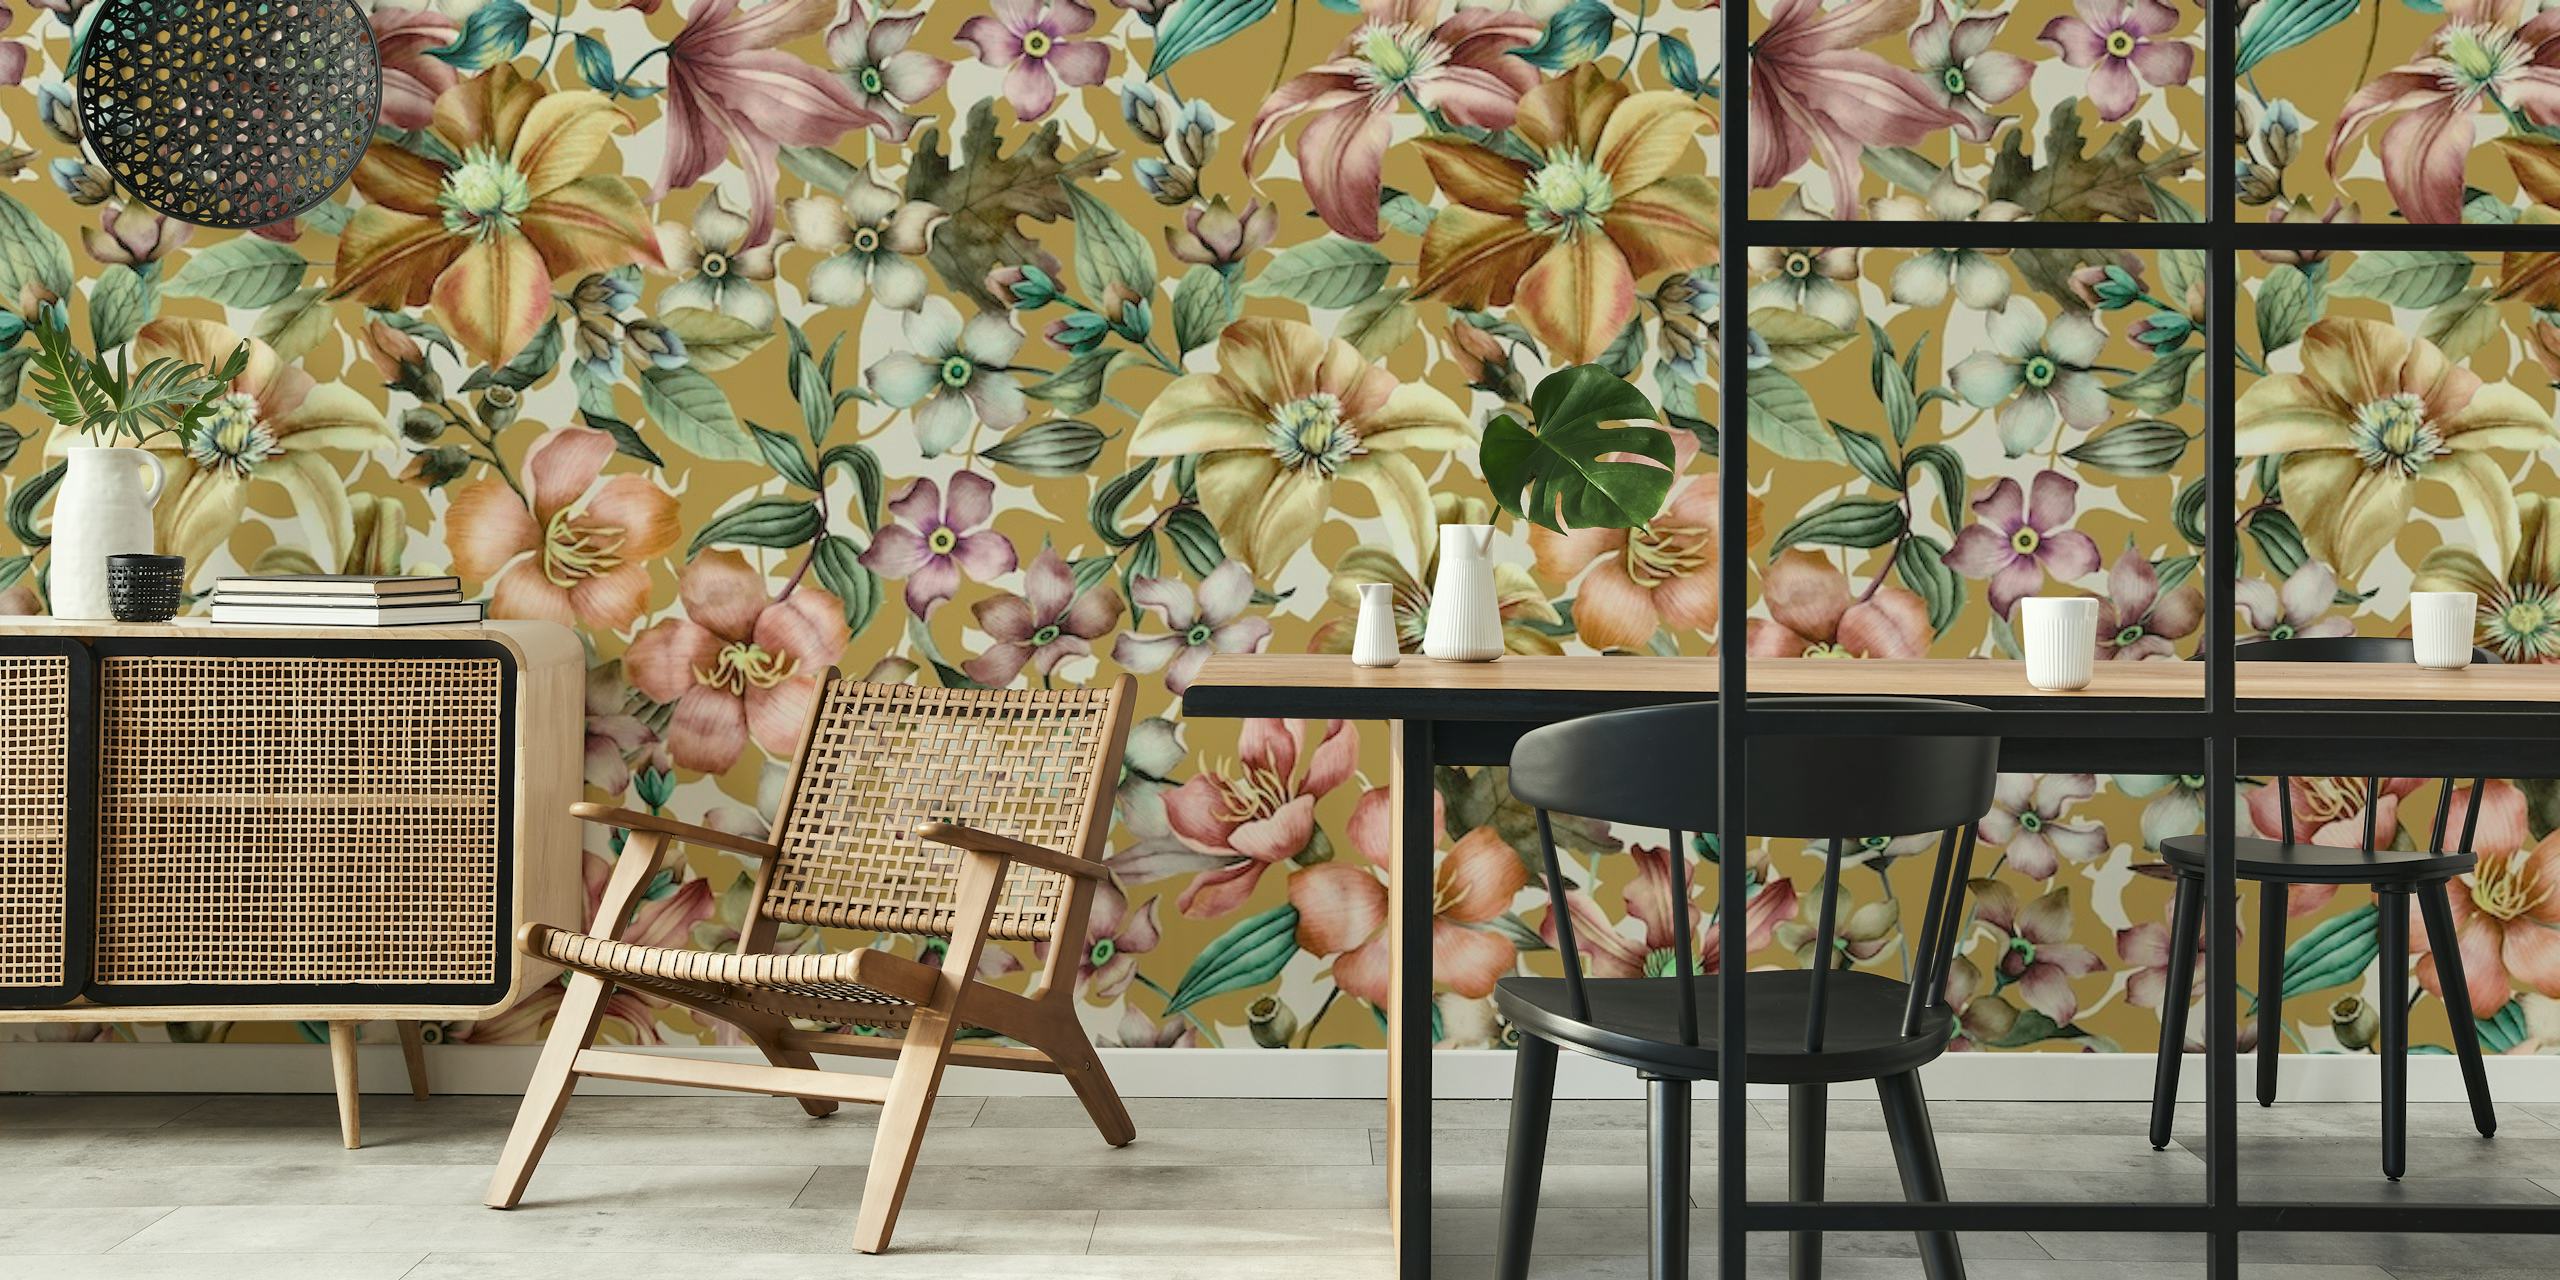 Vintage dramatic garden wall mural with floral patterns